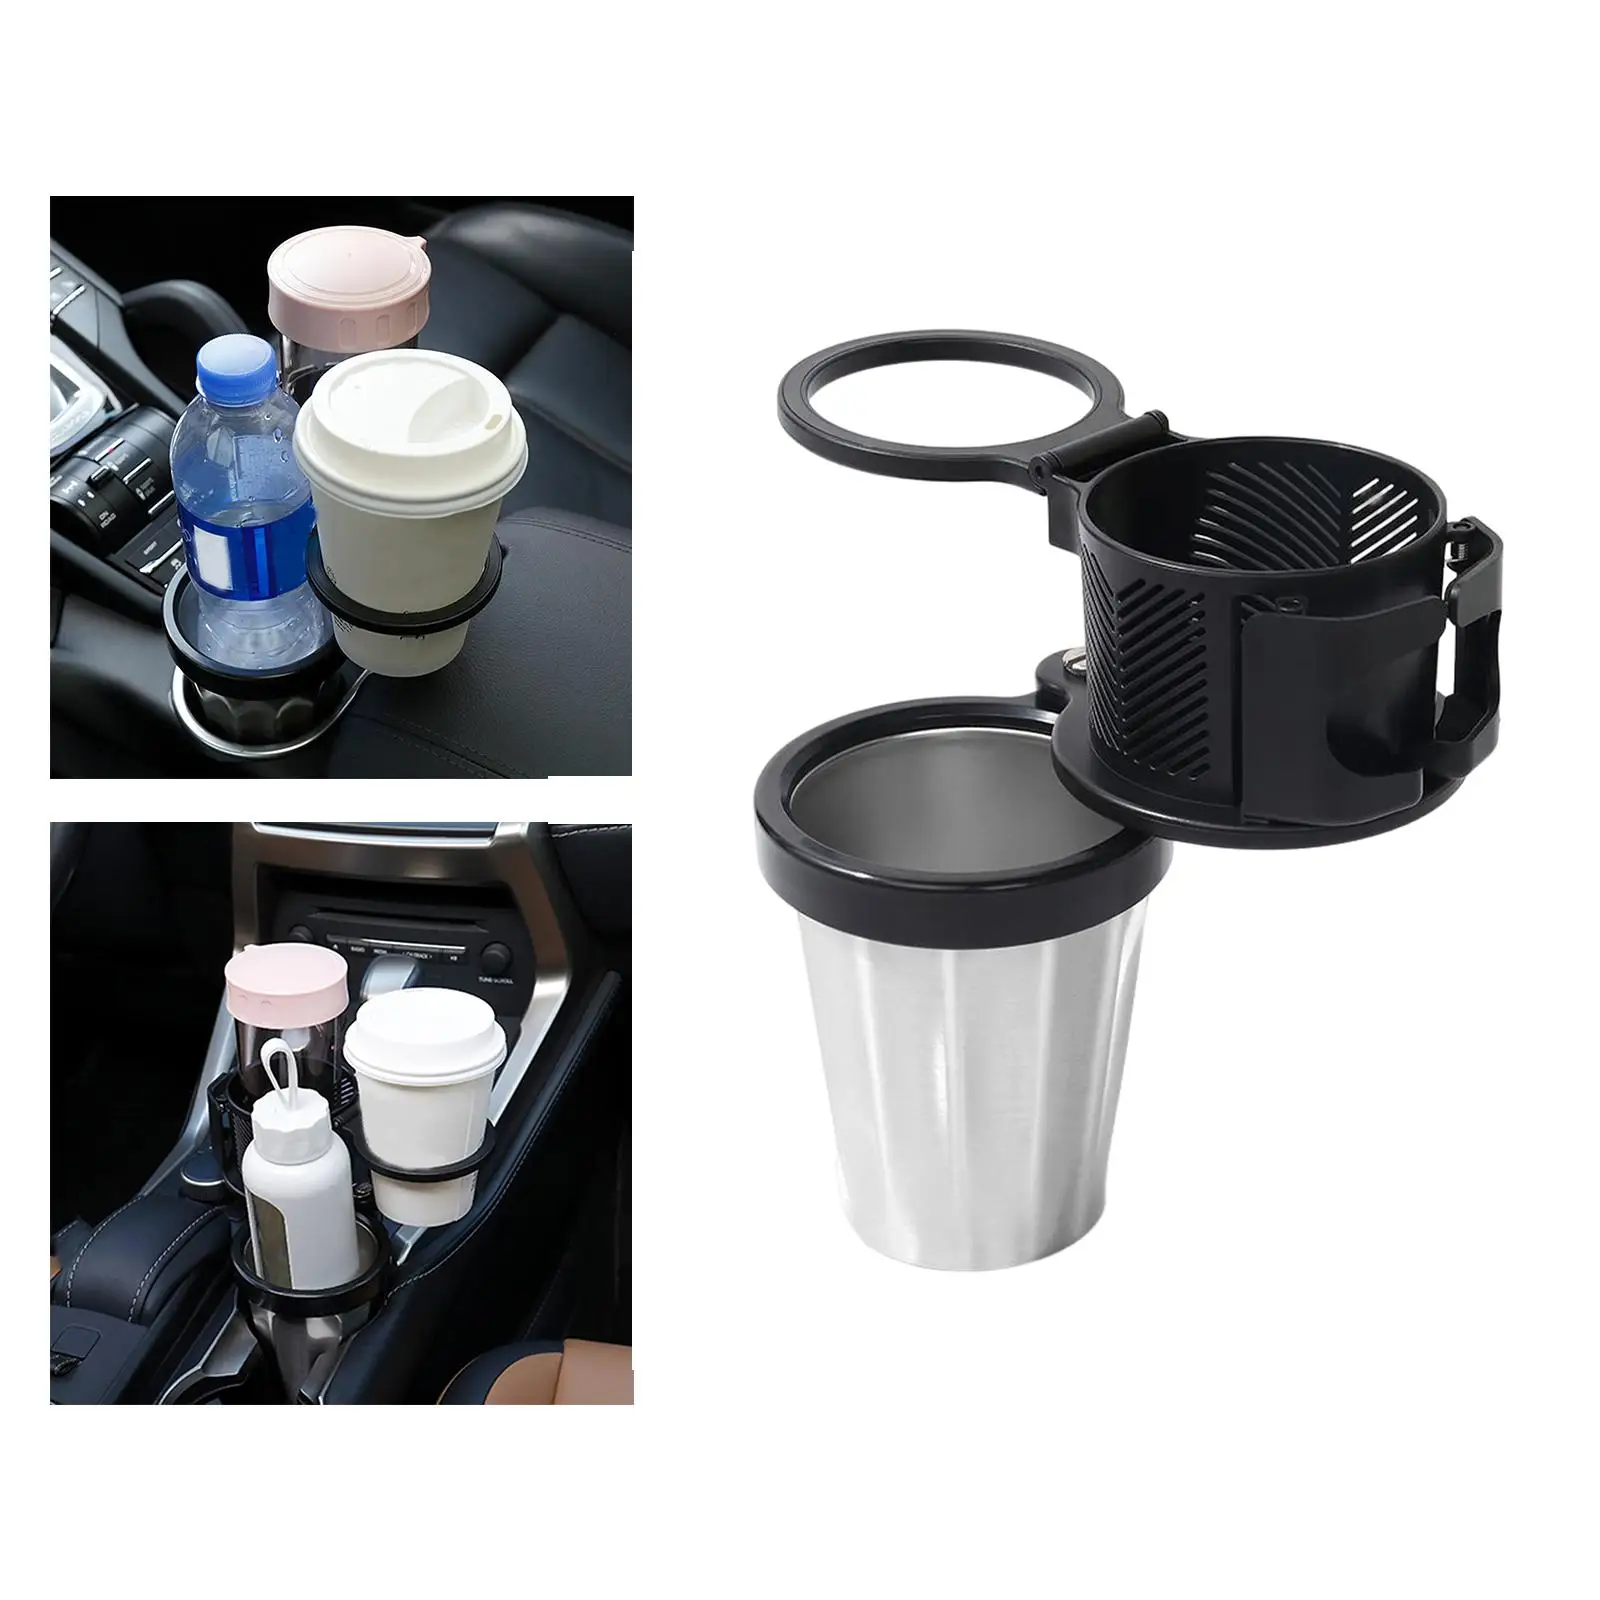 Cup Holder Rotating Base Stand Rack Tray Car Headrest Seat Back Organizer Car Cup Holder Expander Car